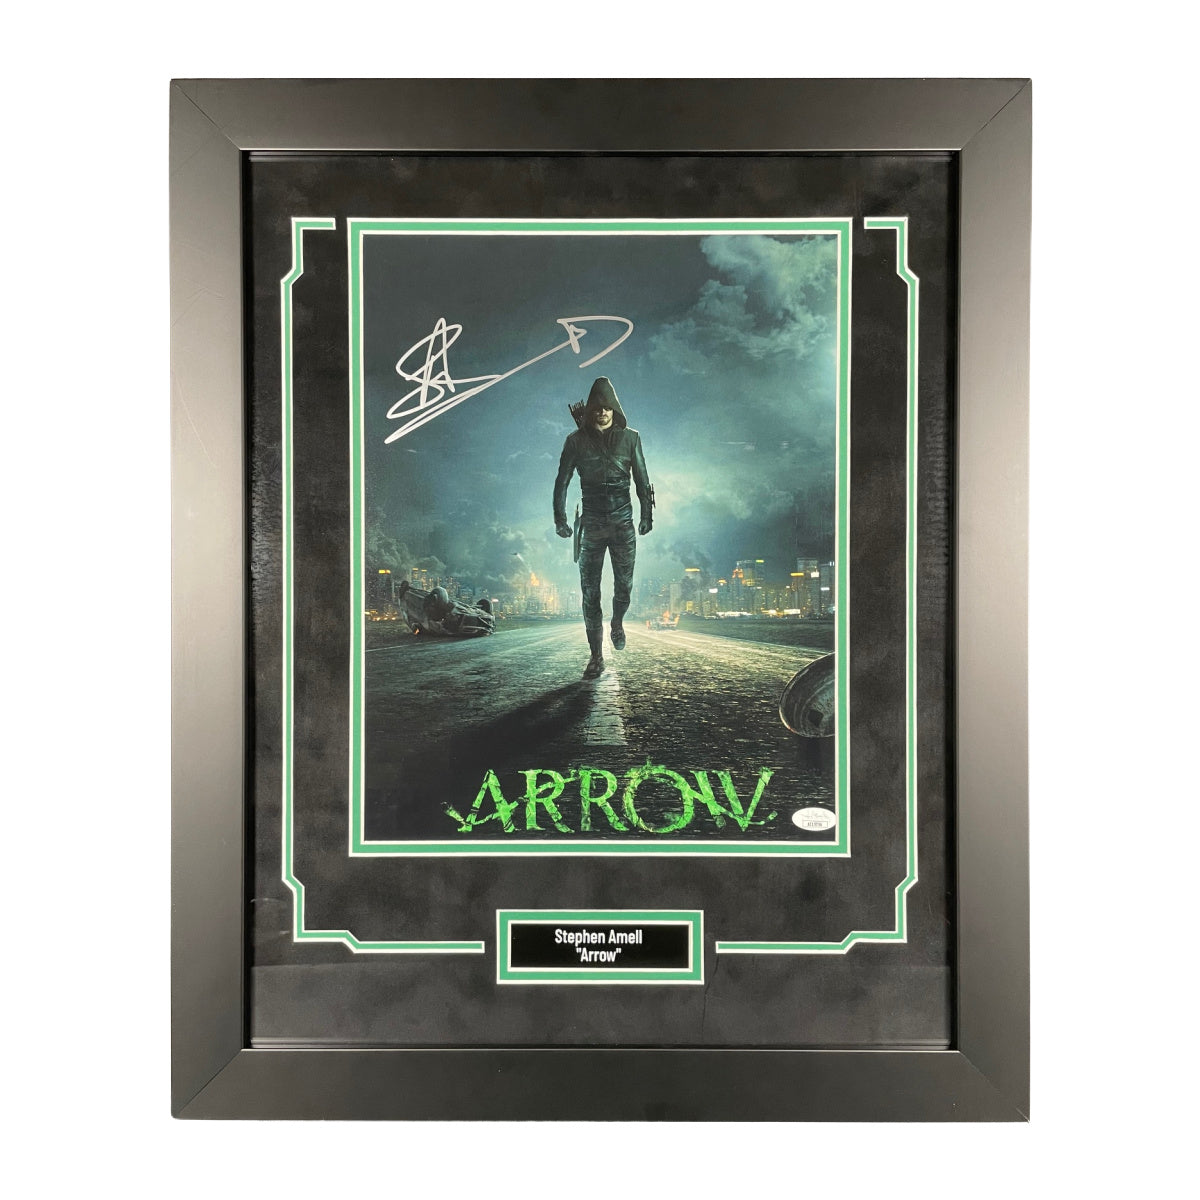 Stephen Amell Signed 11x14 Photo Arrow Oliver Queen Autographed JSA COA